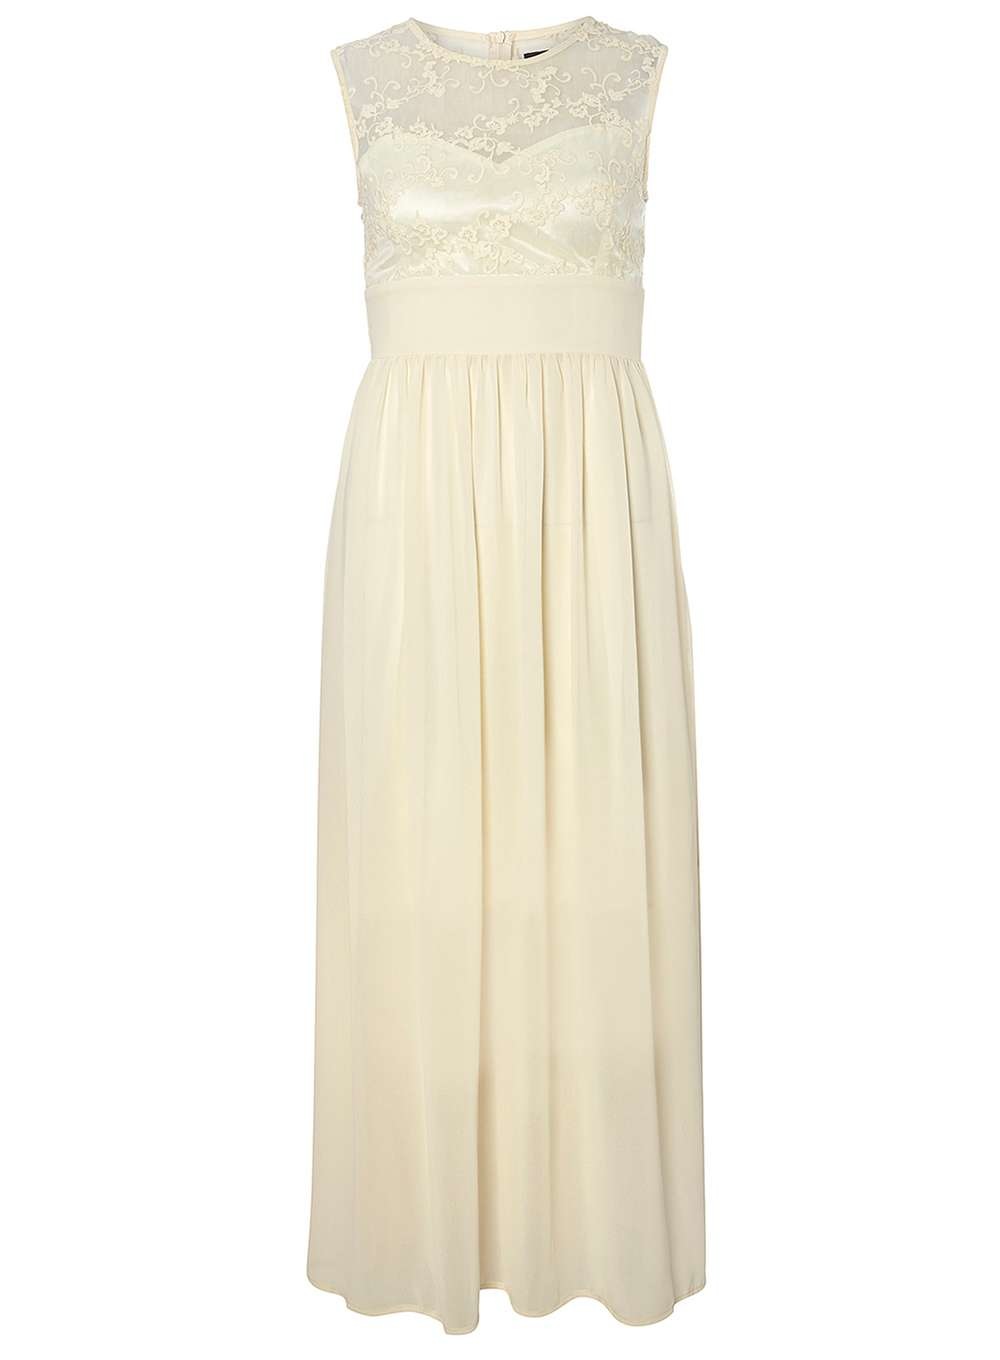 Picture Picture Dorothy Perkins wedding dress, high street wedding dress, maxi wedding dress from high street, off the rack maxi wedding dress, maxi wedding dress for less than £50, Alt Text